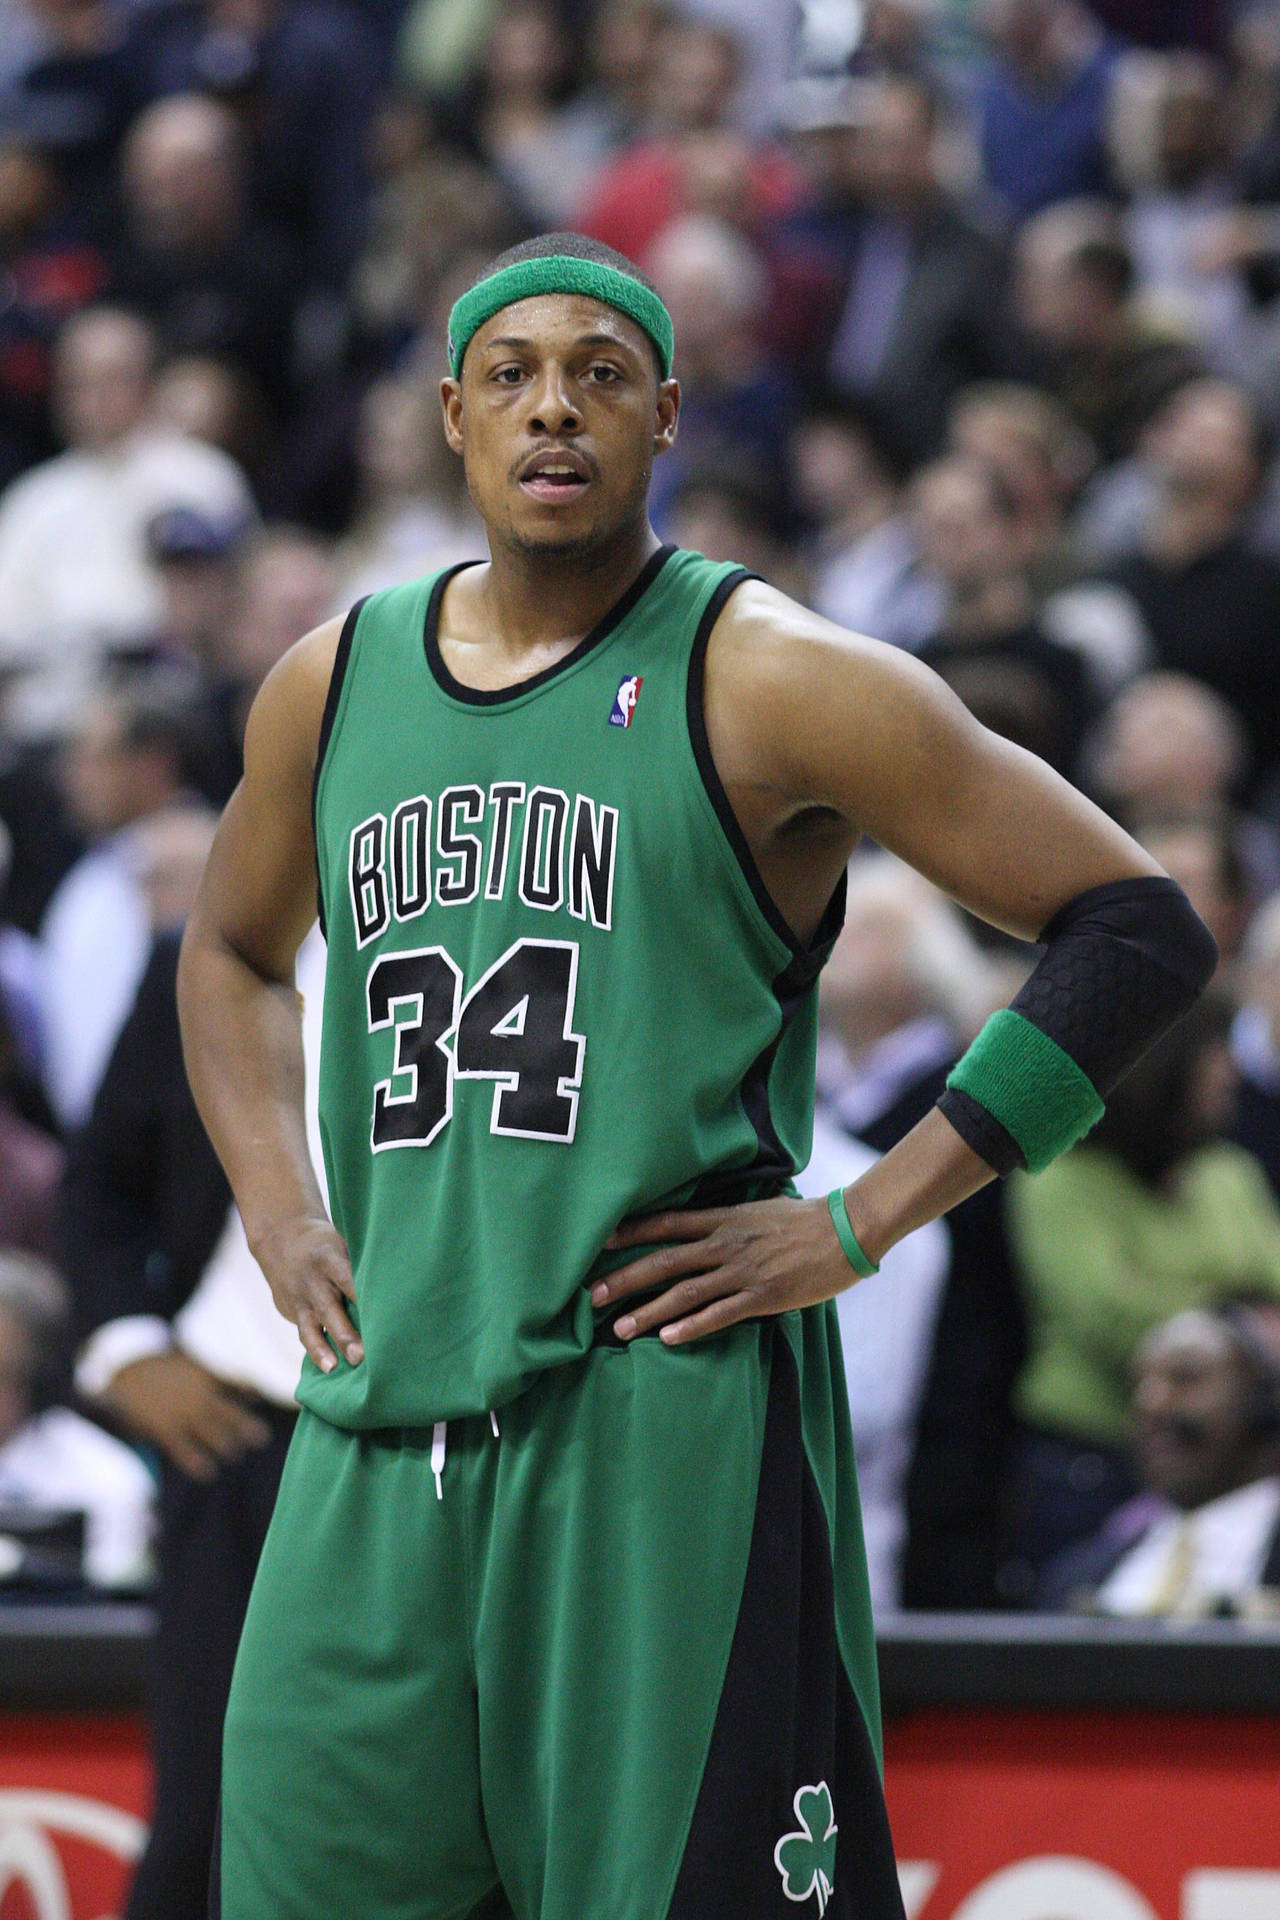 Paul Pierce With Hands On Hips In Uniform